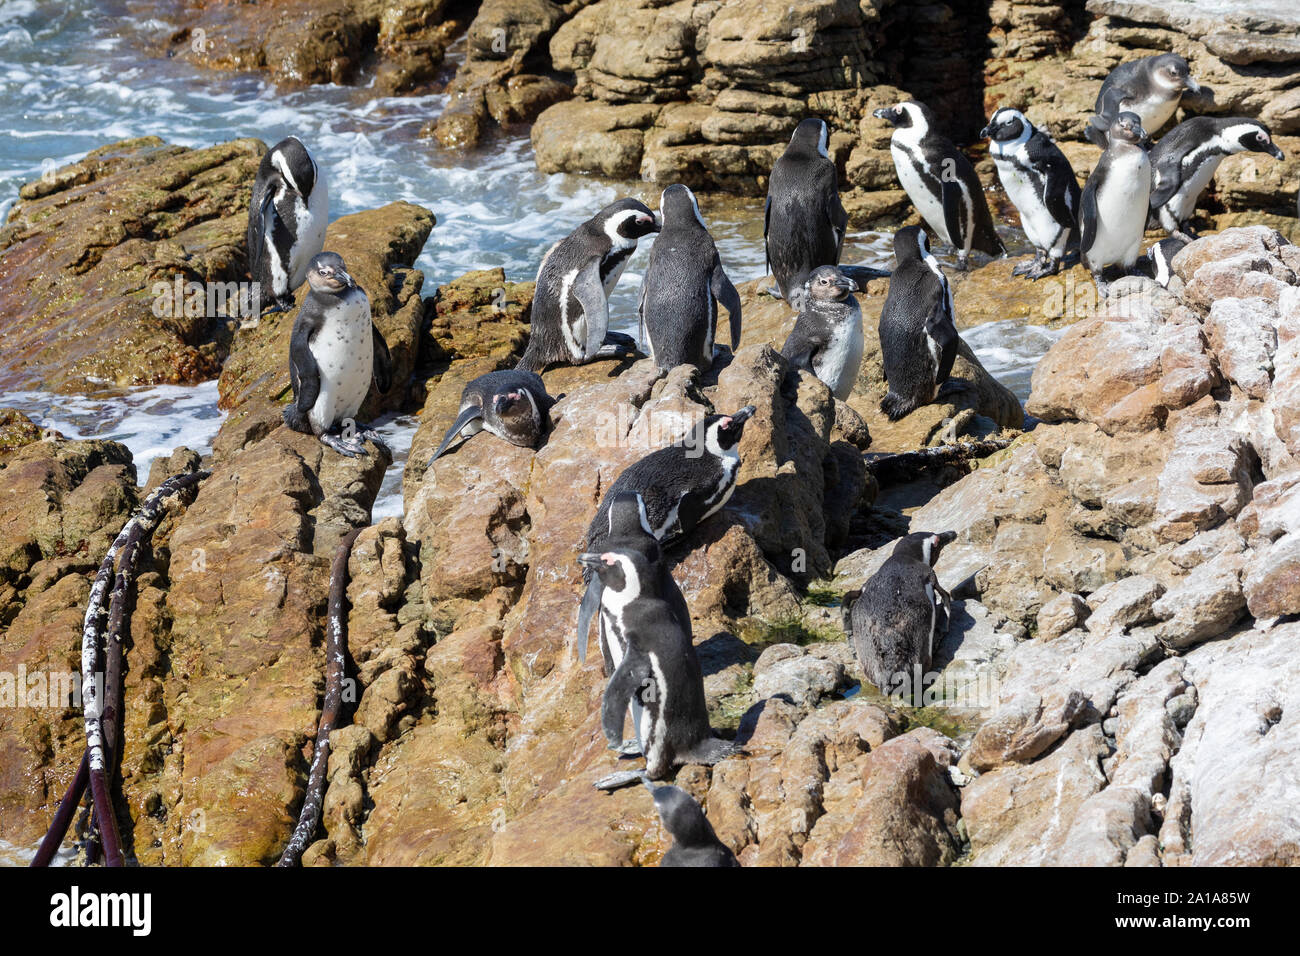 Endangered African Penguins (Spheniscus demersus), Stony Point Nature Reserve, Betty's Bay, South Africa. Breeding colony adults juveniles Stock Photo